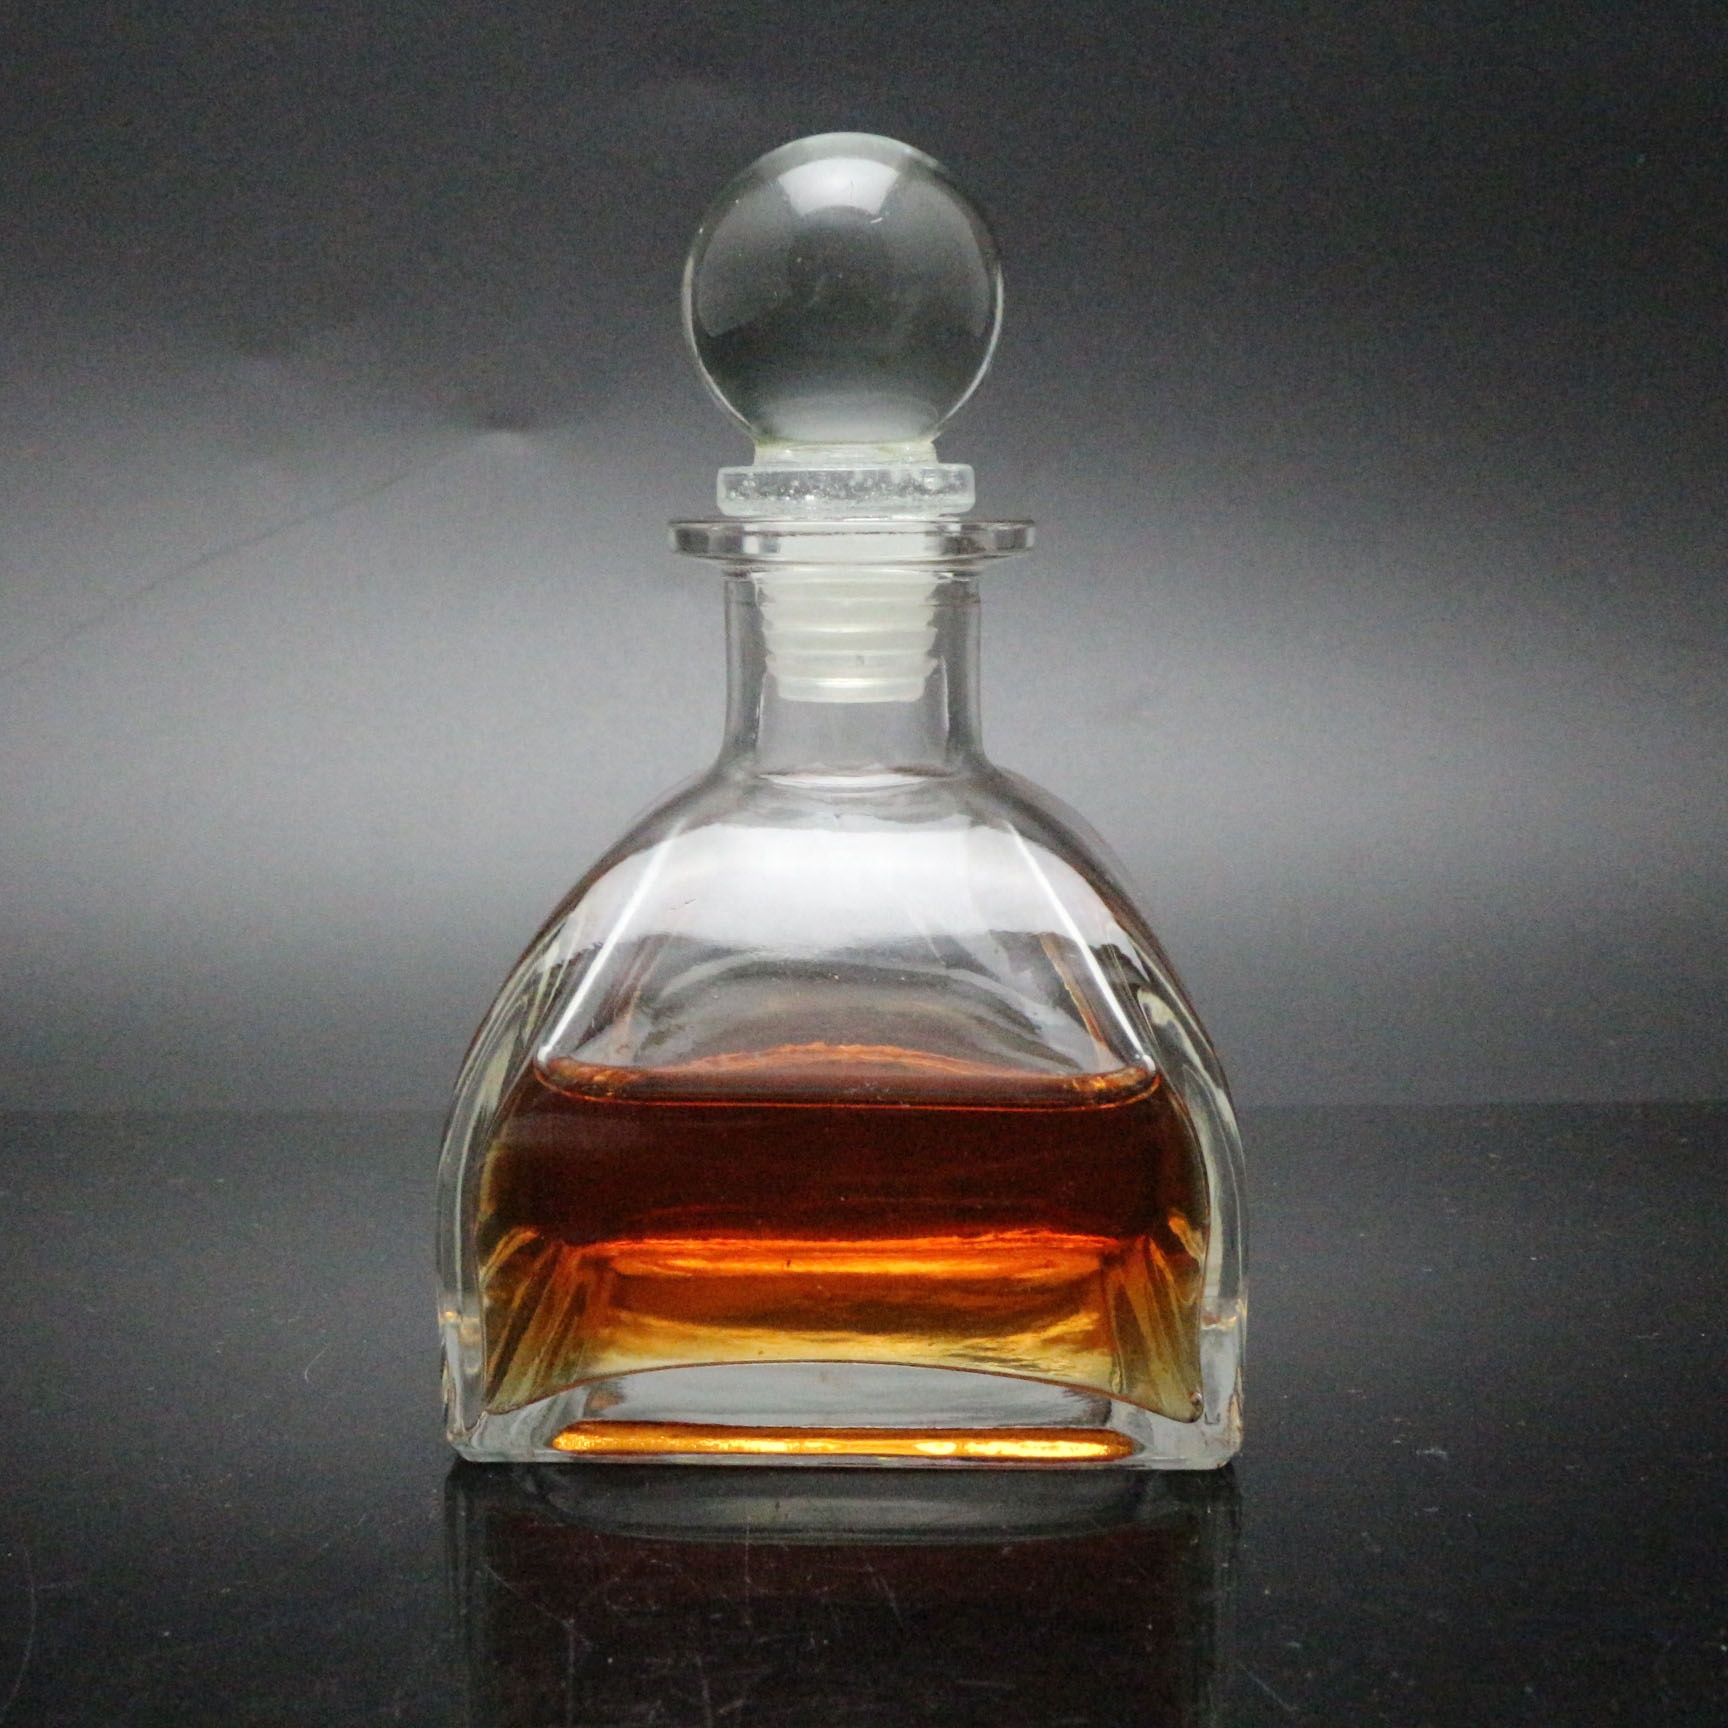 Square Reed Diffuser Bottles Glass 100ml Silver Cap and Free Reeds